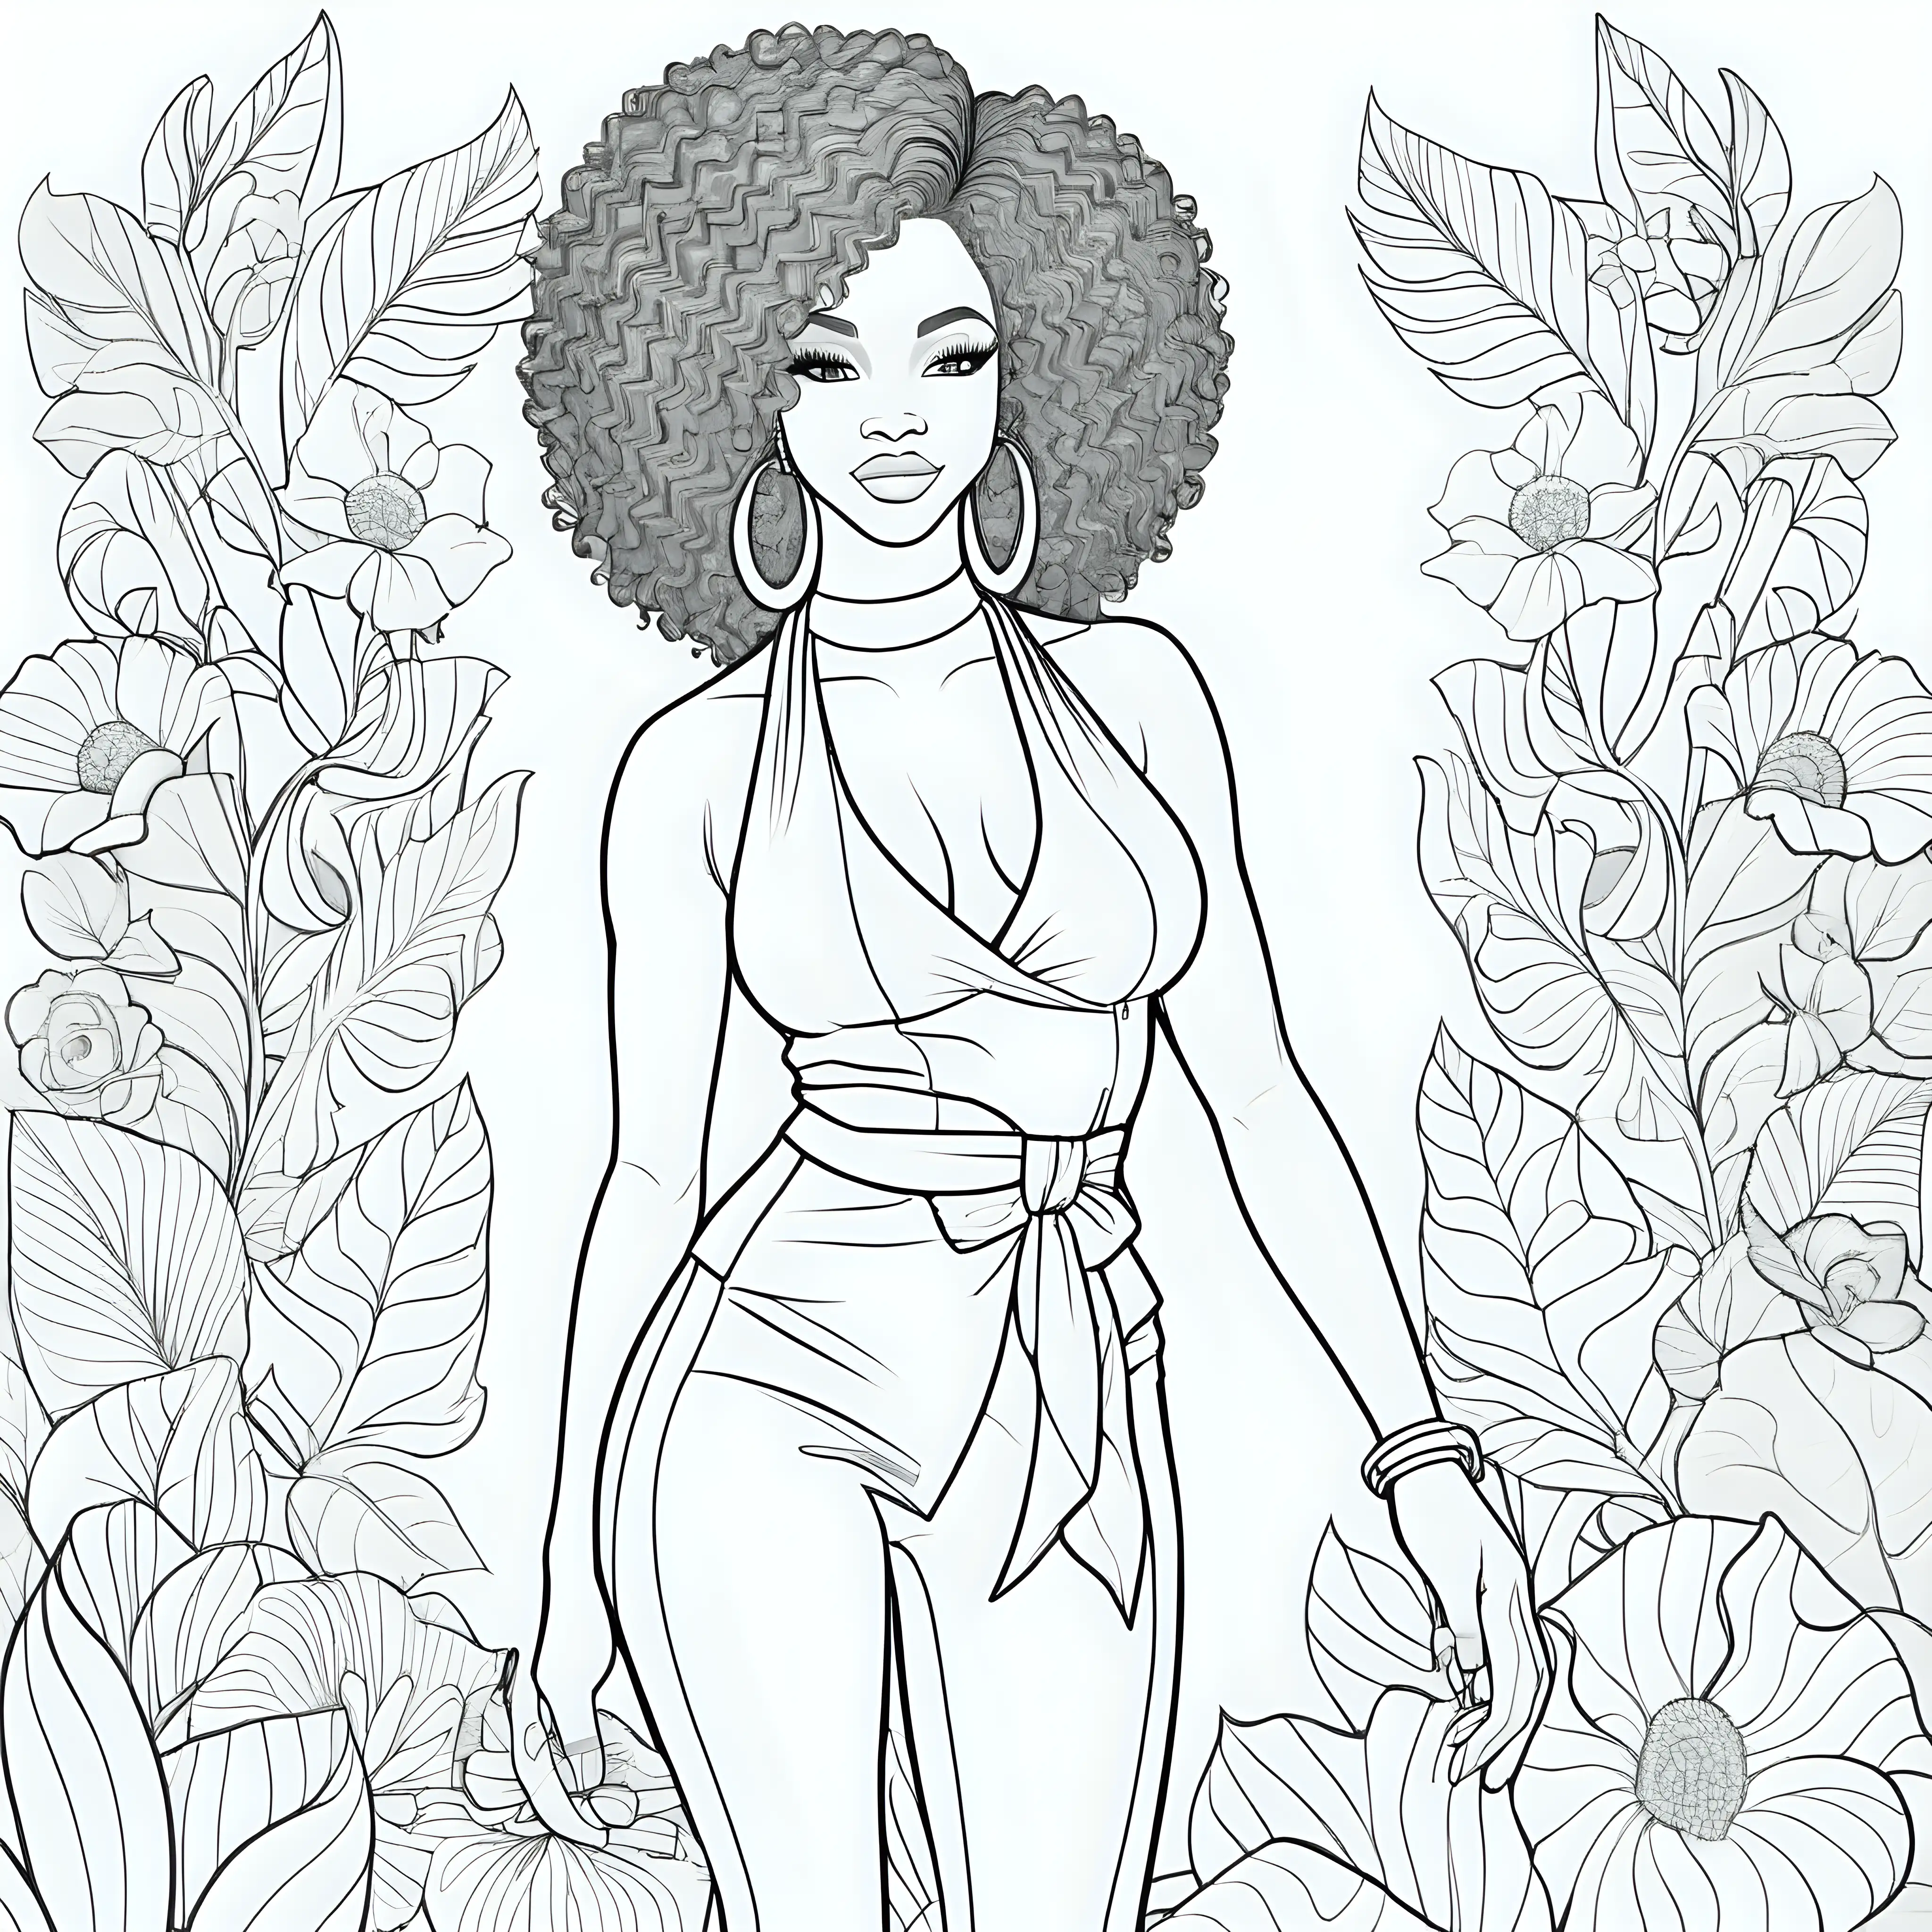 adult coloring book, outline image, no greyscale, no color, no shading,  outline hair only, coloring page style, african american woman, full body pose, fully dressed
fun backgrounds, coloring book lines